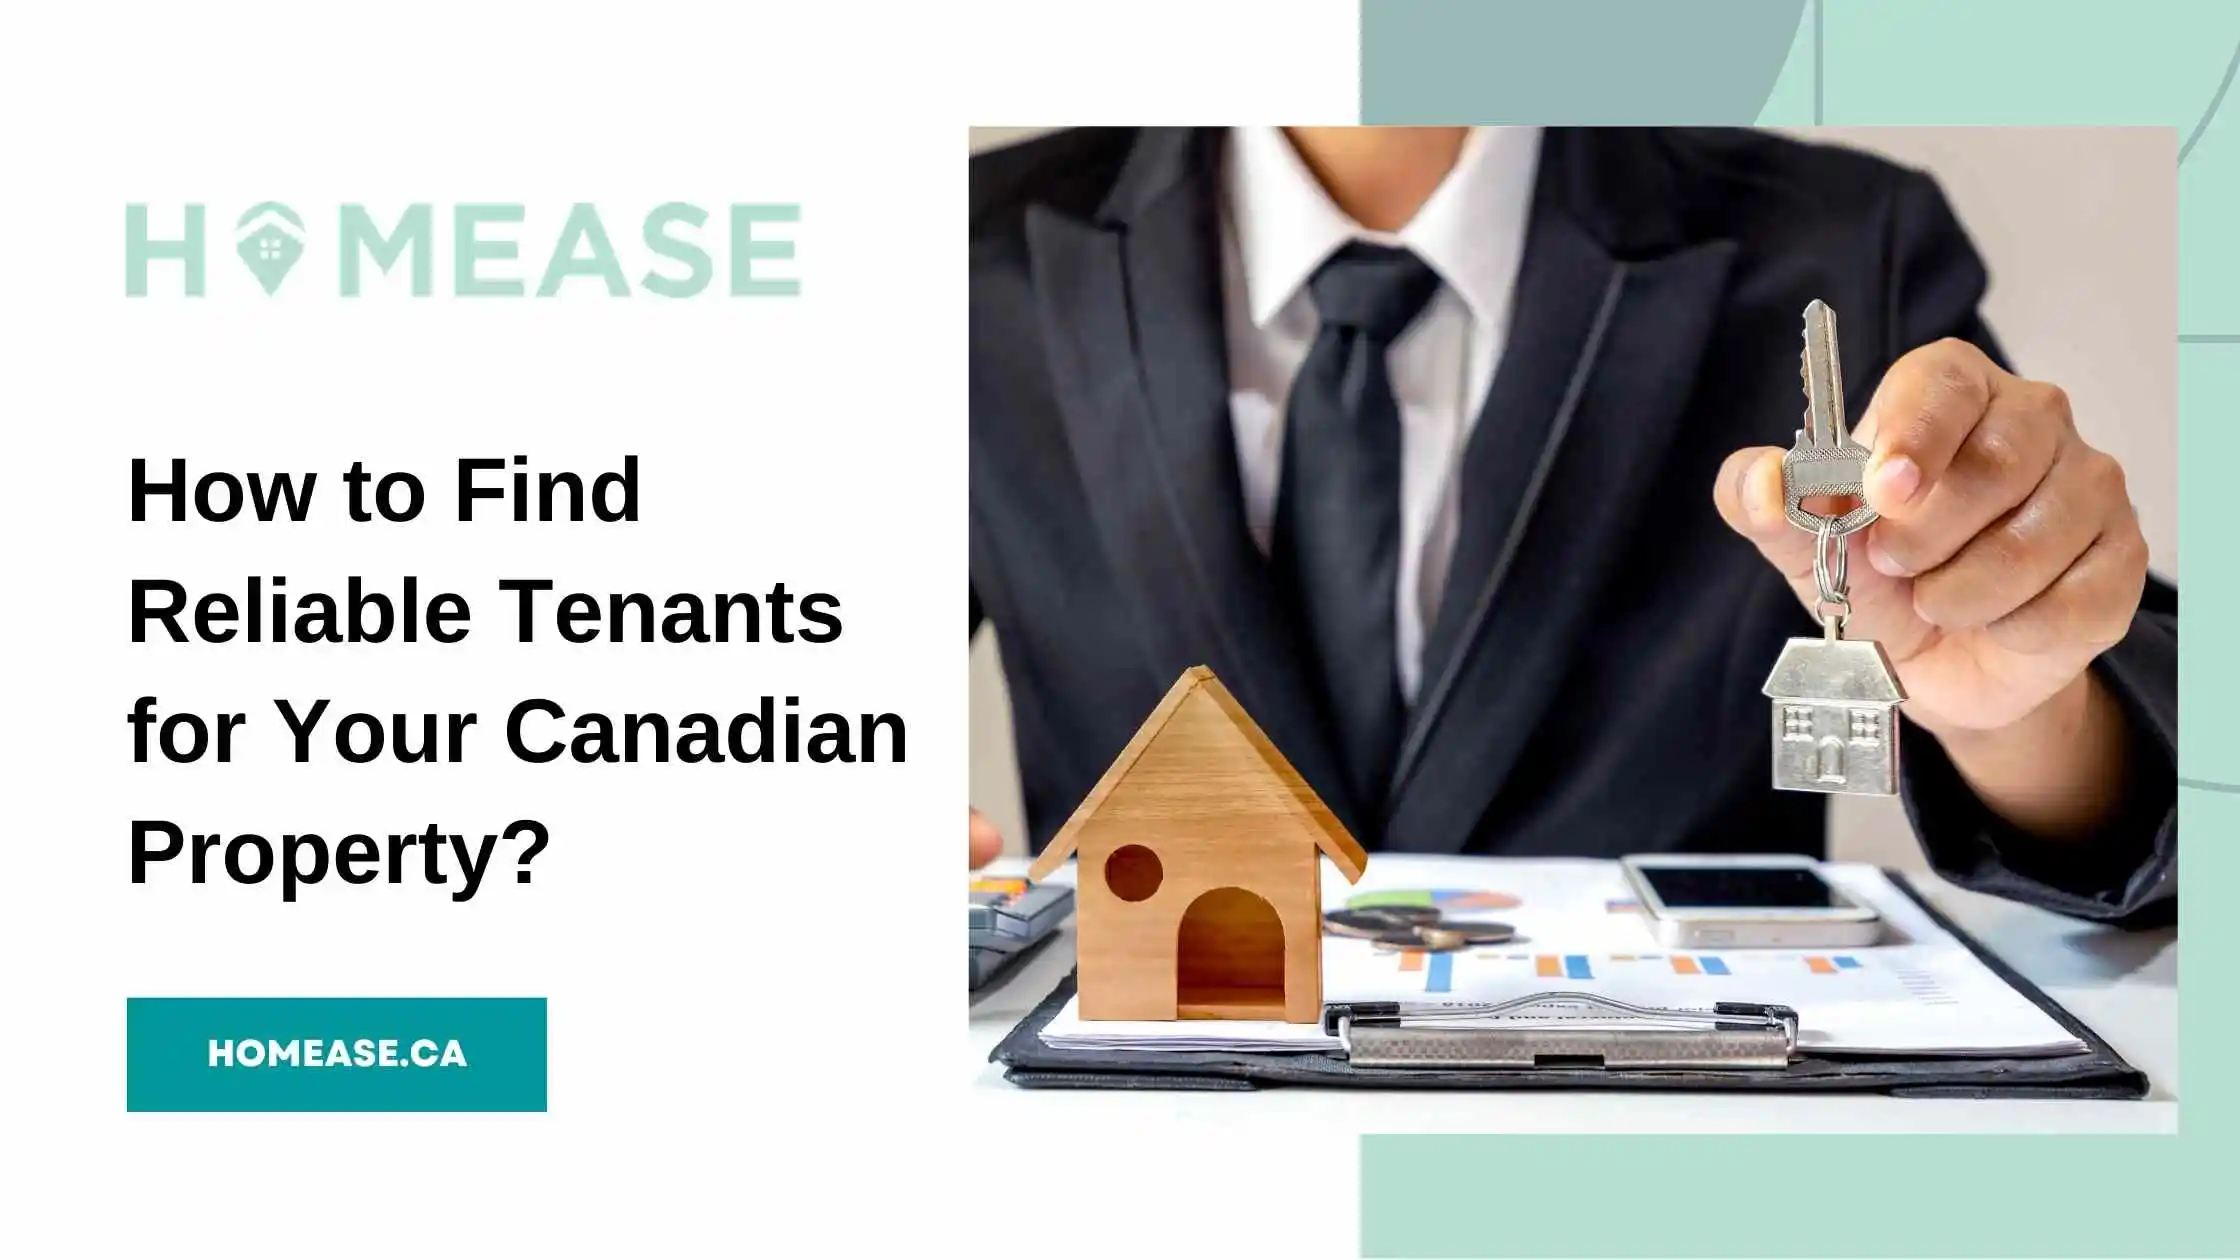 How to Find Reliable Tenants for Your Canadian Property